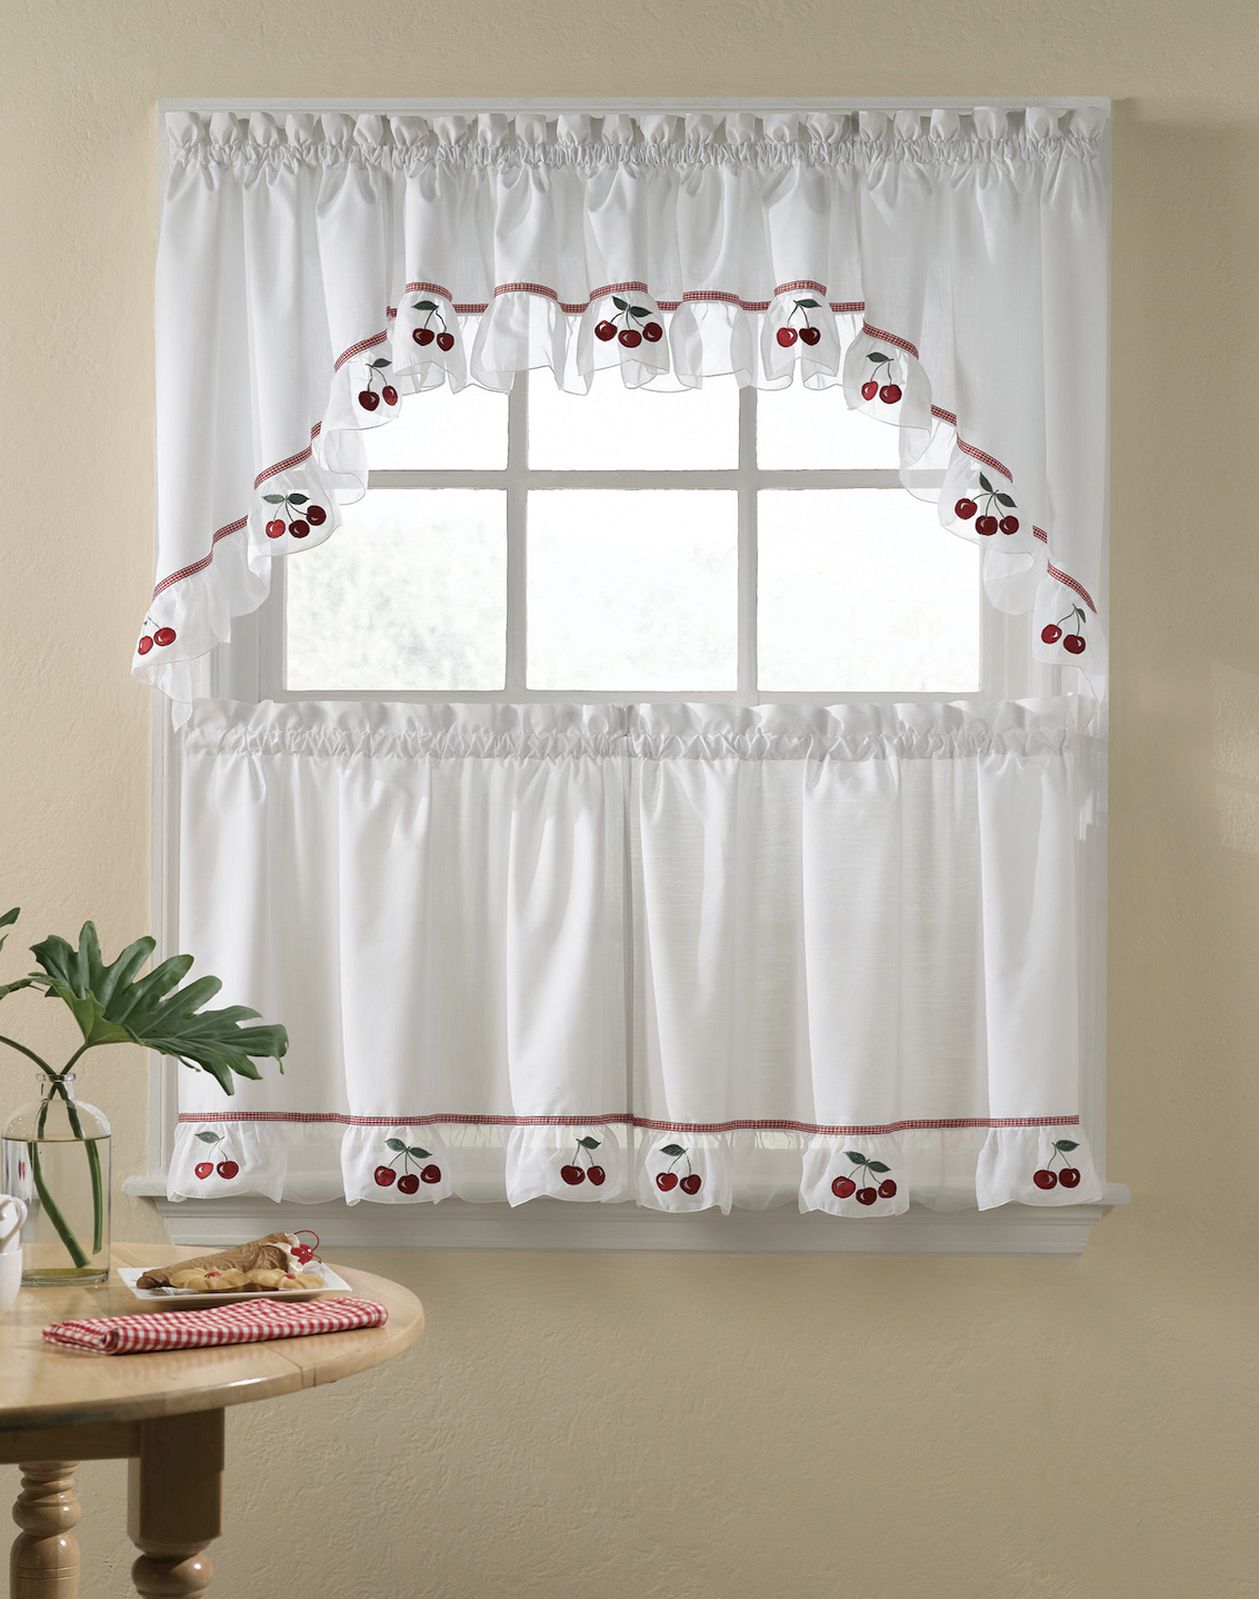 Red And White Kitchen Curtains photo - 1